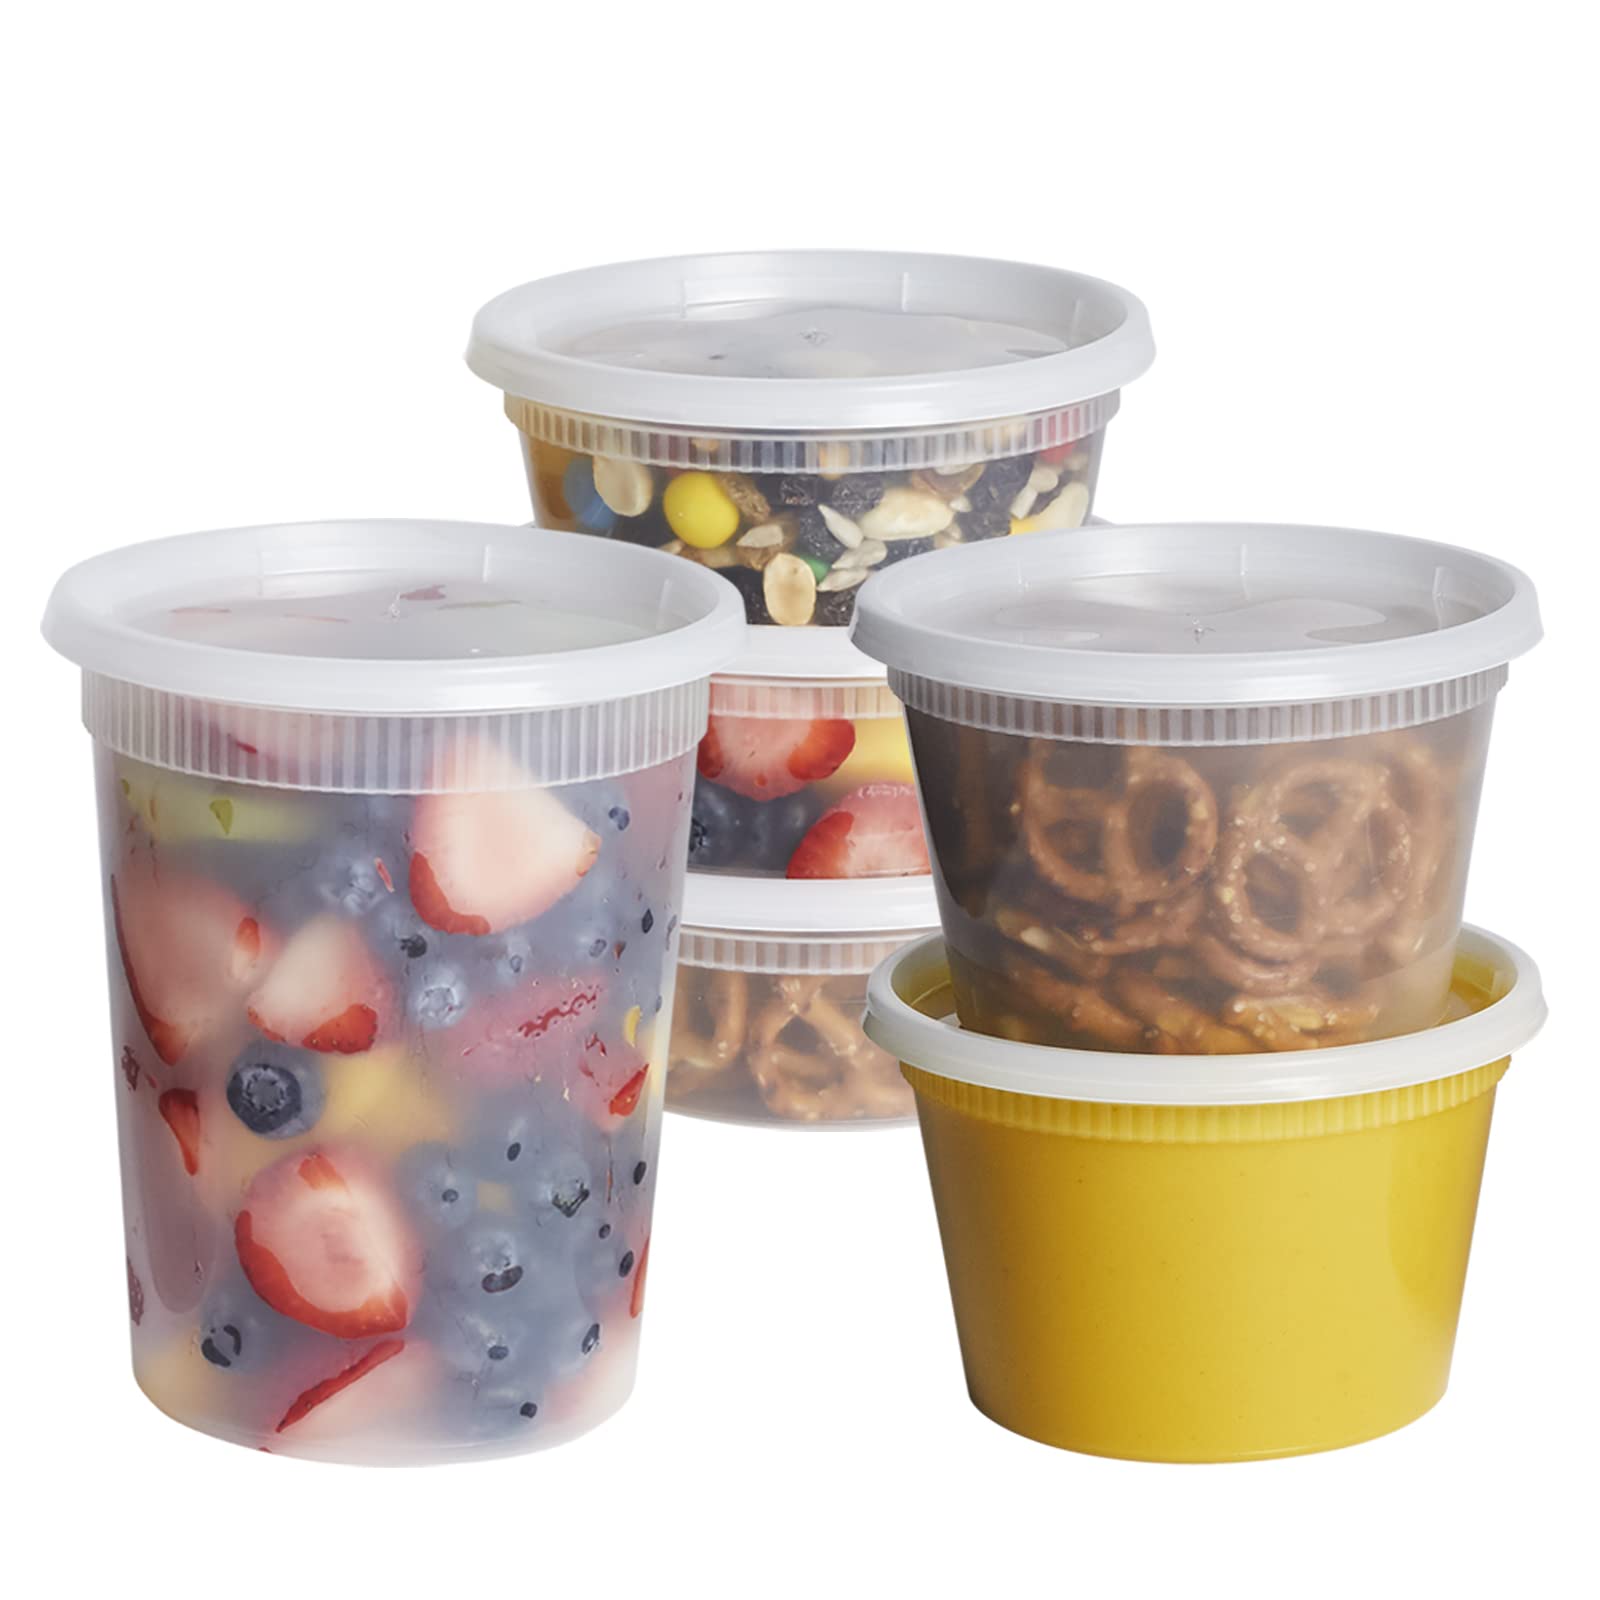 Reli. Deli Containers with Lids (50 Sets Total) | Variety Pack - 8 oz (20  Sets), 16 oz (20 Sets), 32 oz (10 sets) | Plastic Soup Containers with Lids